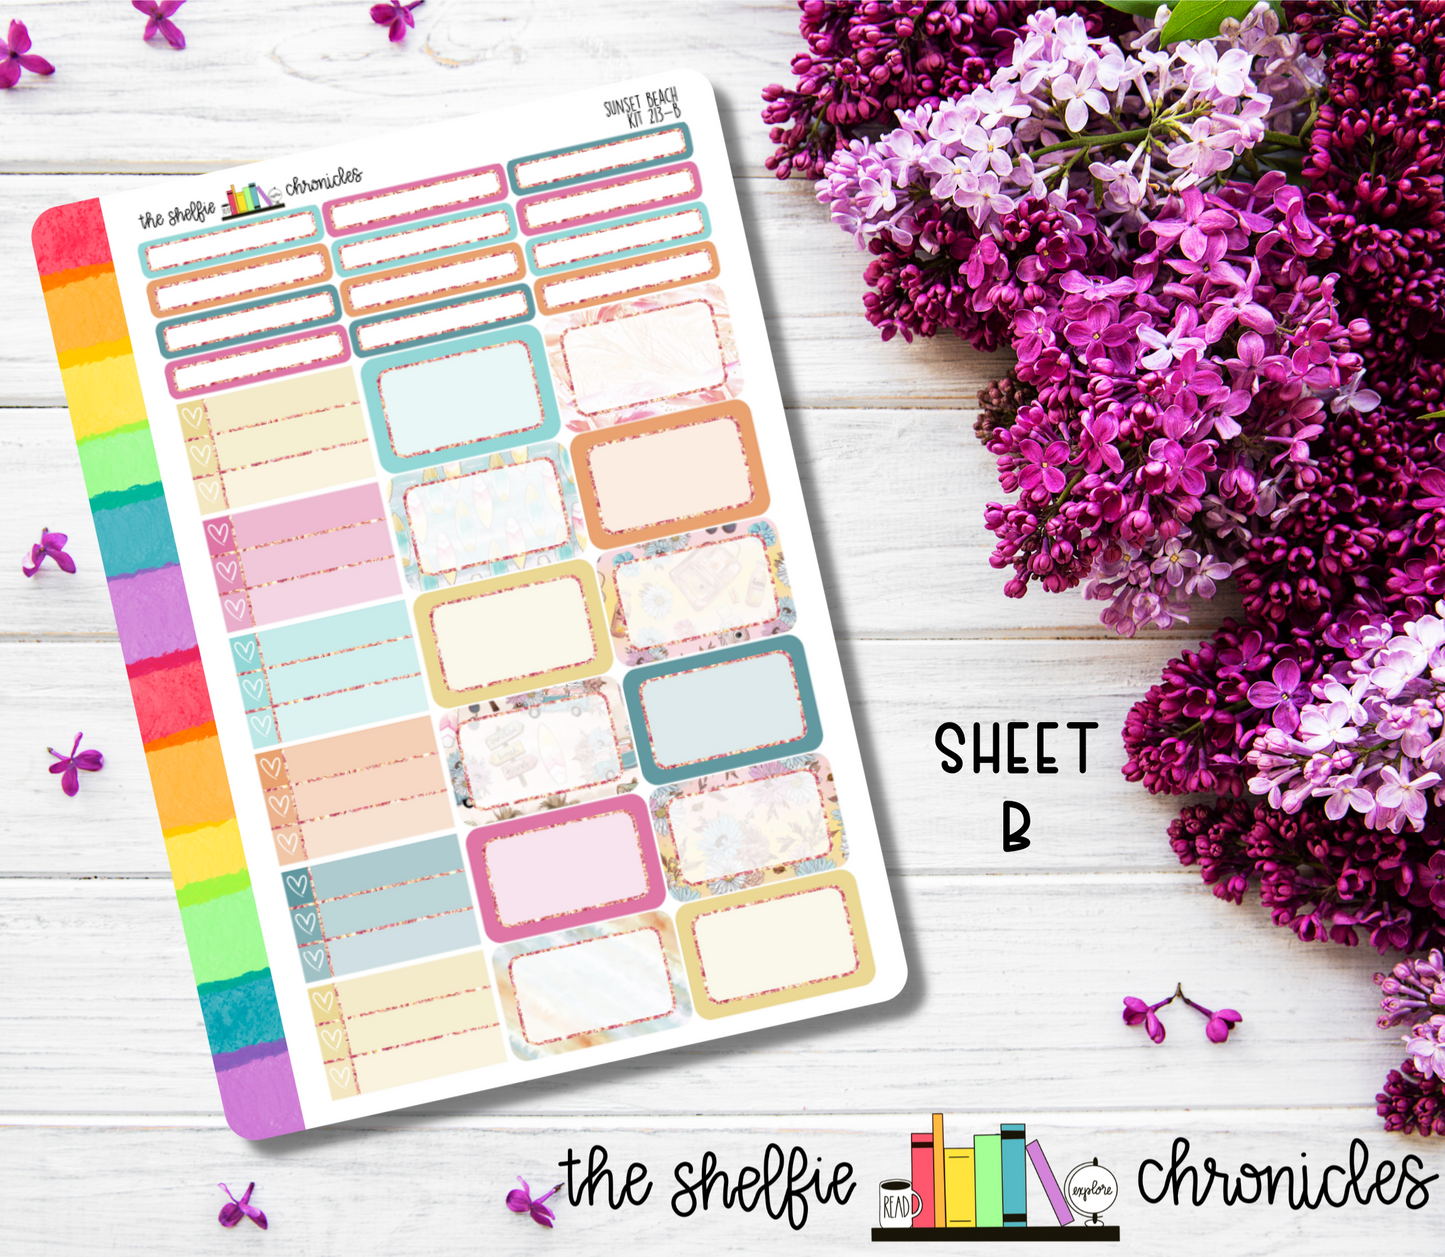 Kit 213 - Sunset Beach Weekly Kit - Die Cut Stickers - Repositionable Paper - Made To Fit 7x9 Planners